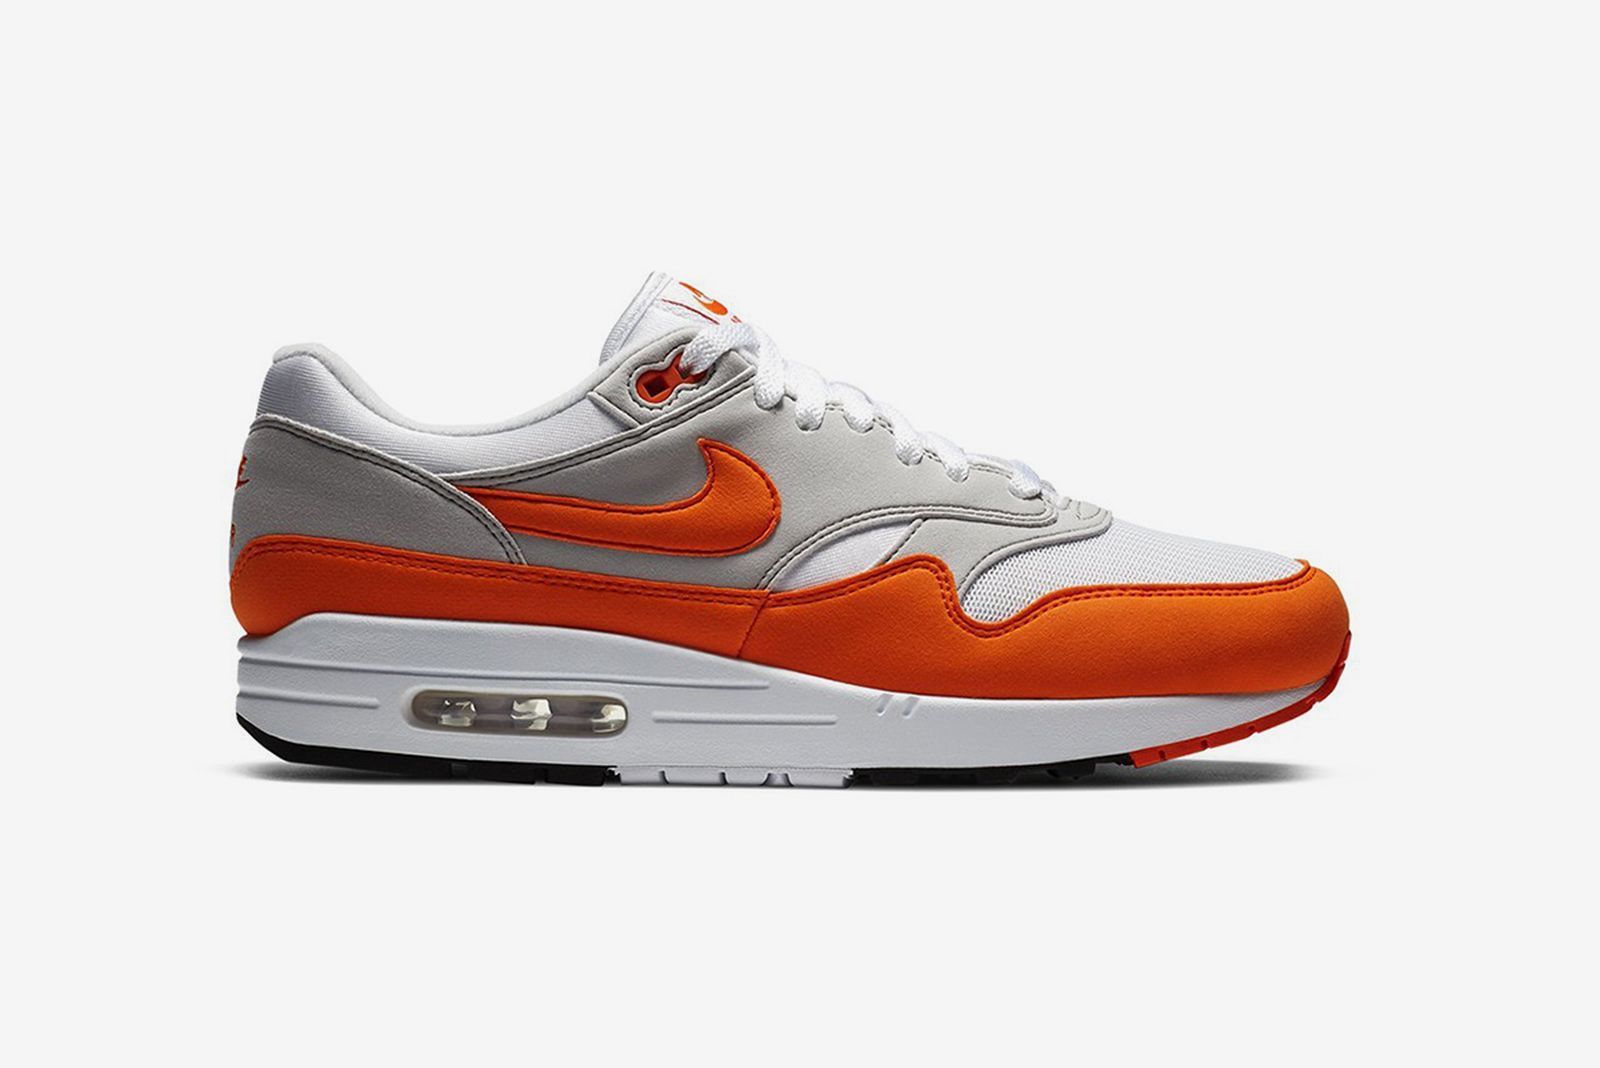 Nike orange and white air max Air Max 1 "Anniversary" Pack: First Look & Release Info